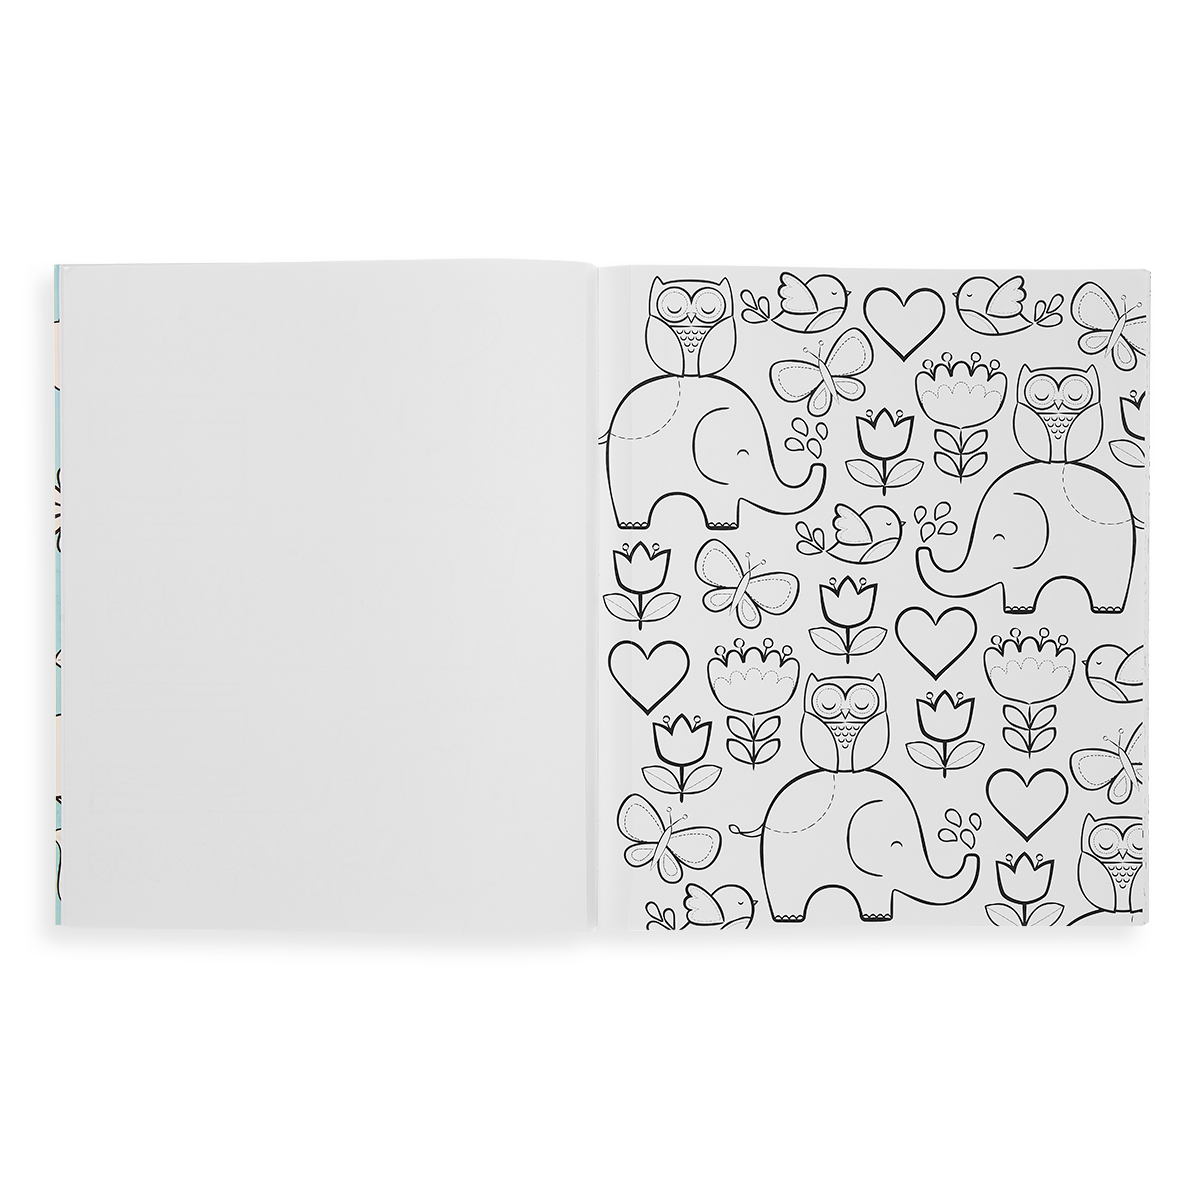 Little Cozy Critters Coloring Book